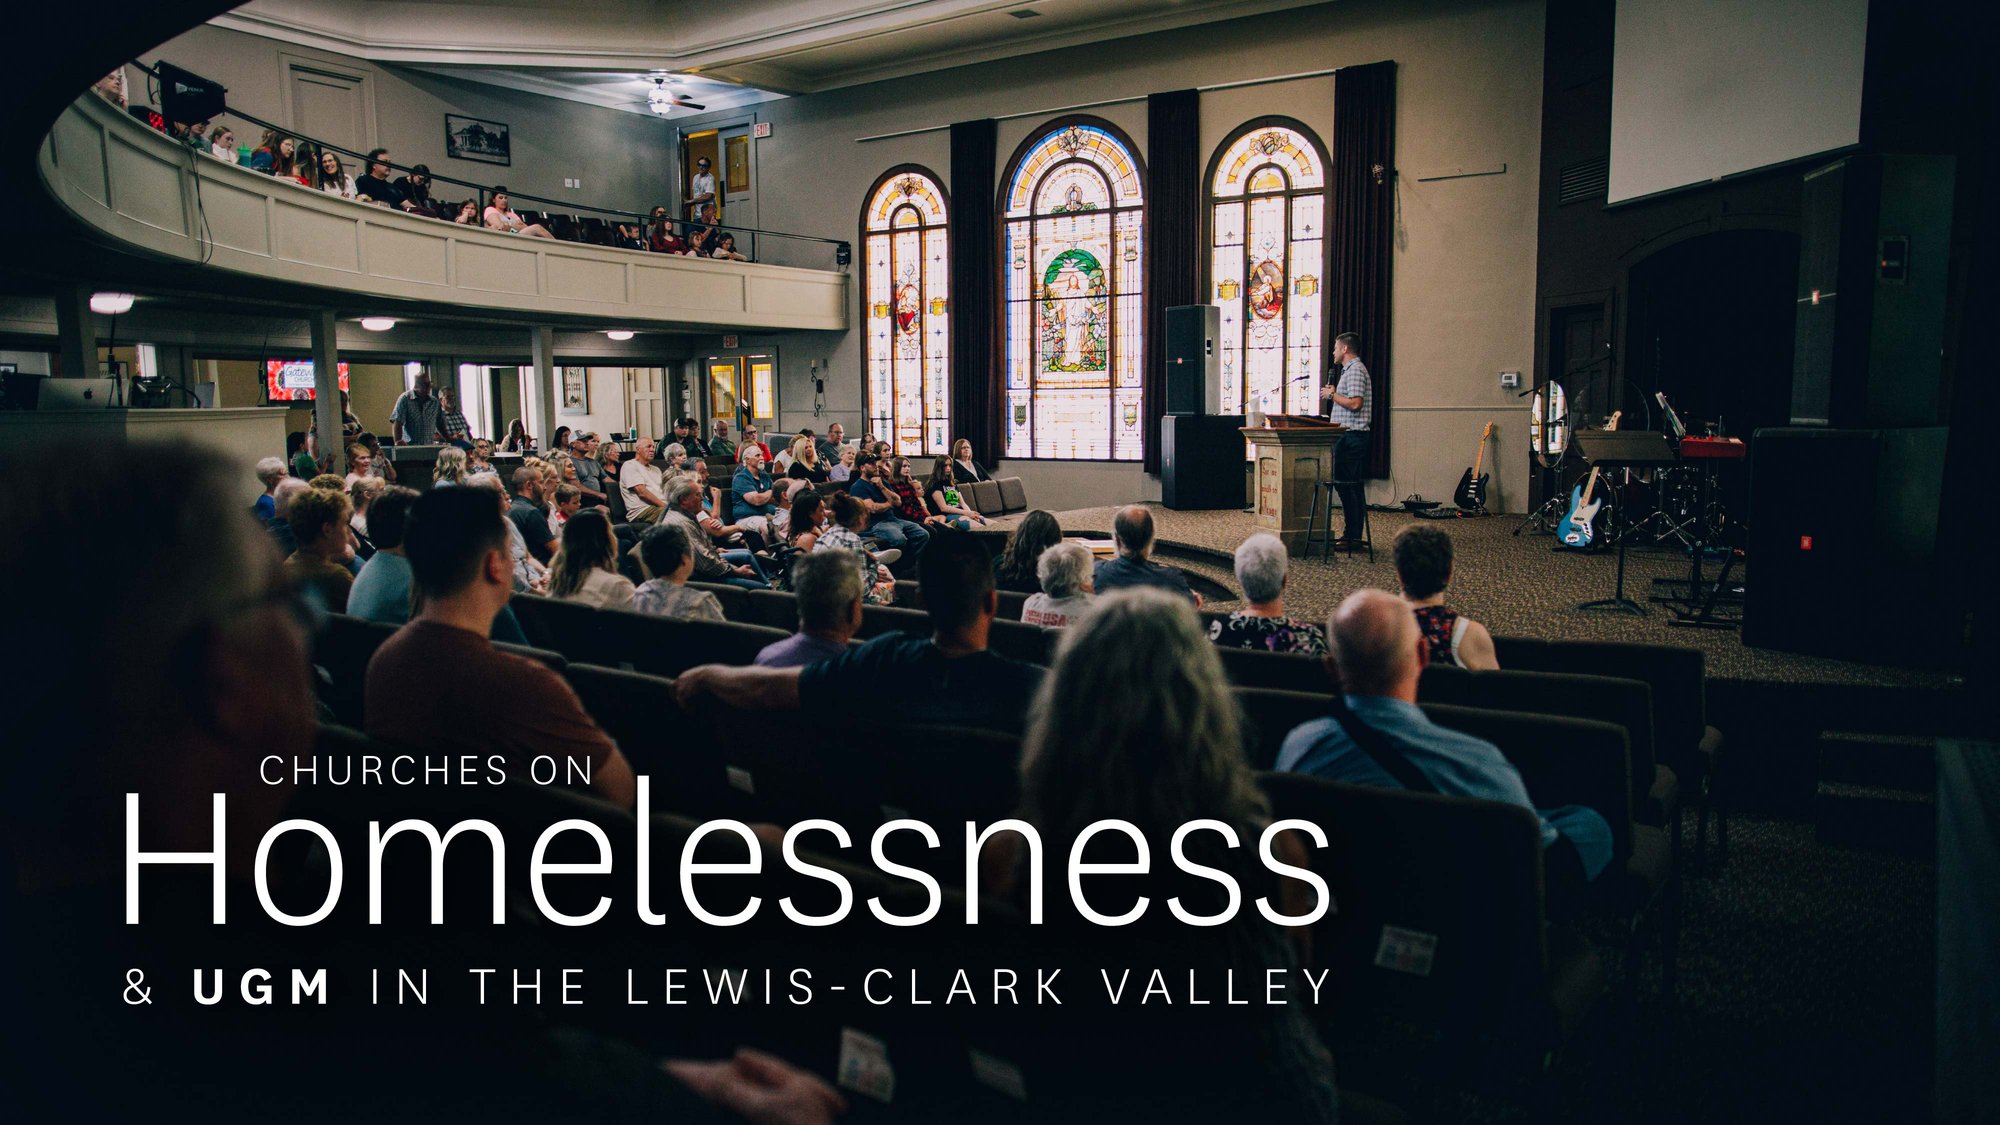 Churches on Homelessness and UGM in the Lewis-Clark Valley